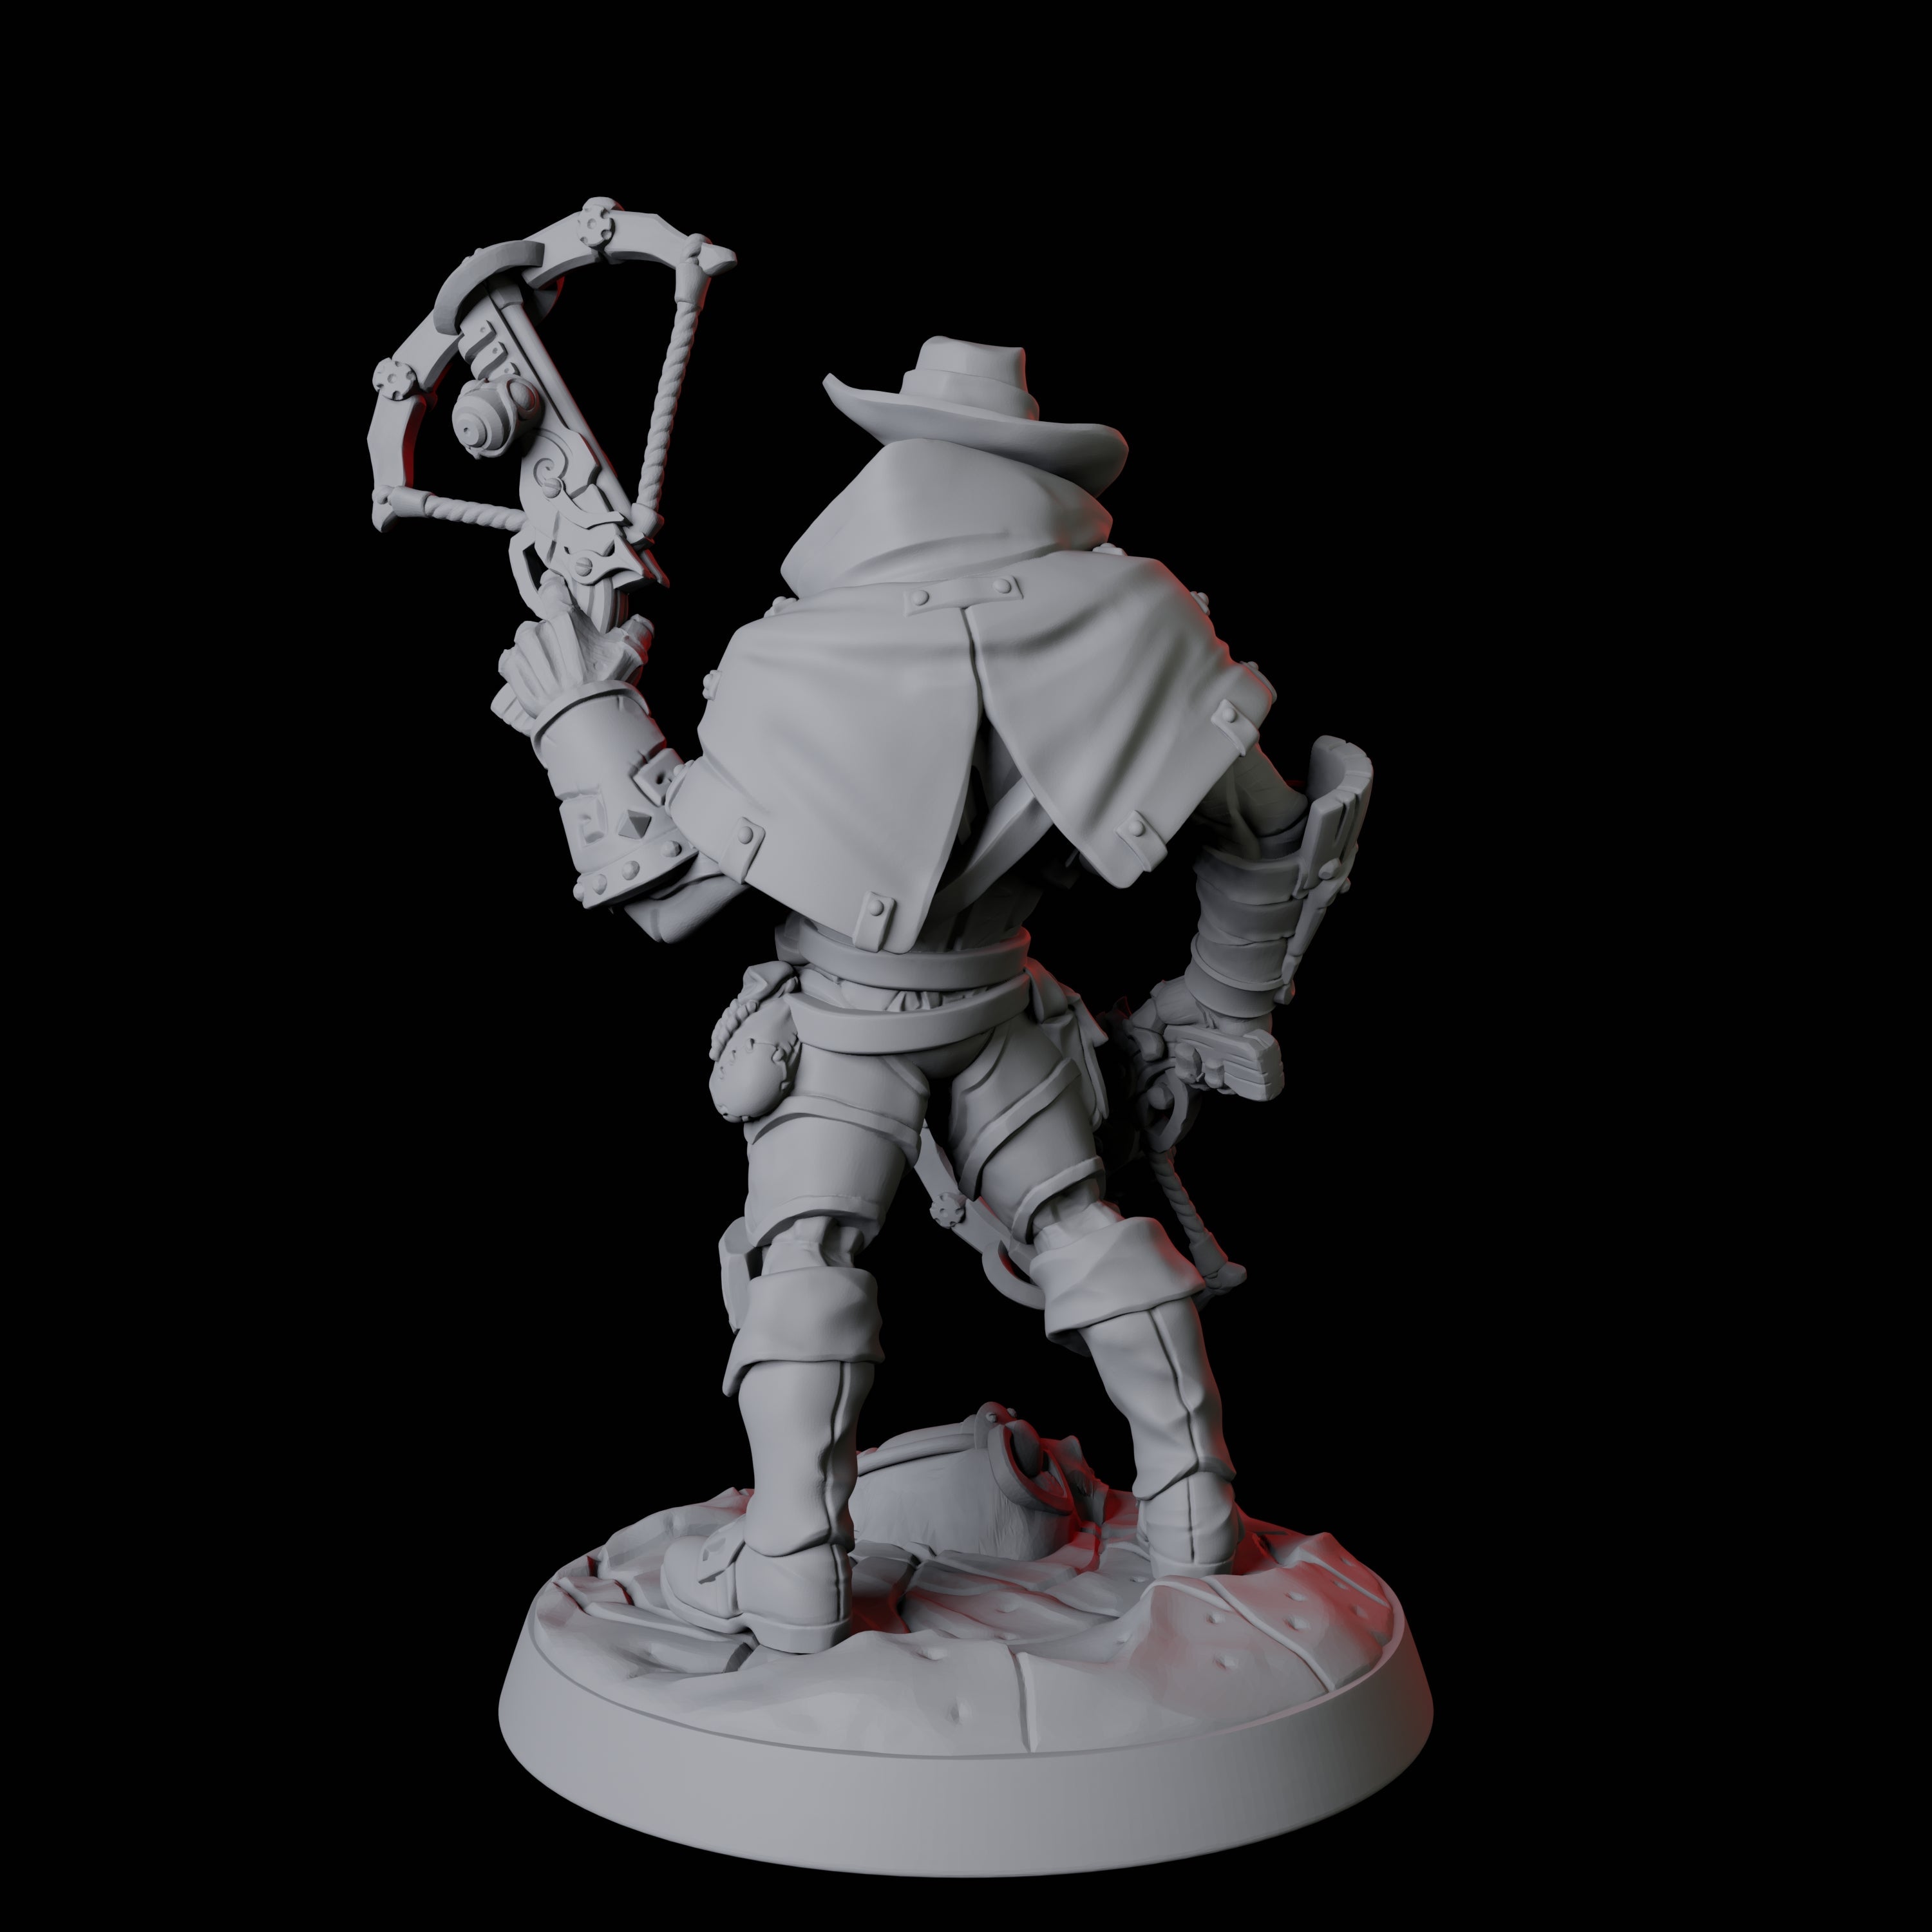 Warforged Gunslinger Fighter Miniature for Dungeons and Dragons, Pathfinder or other TTRPGs